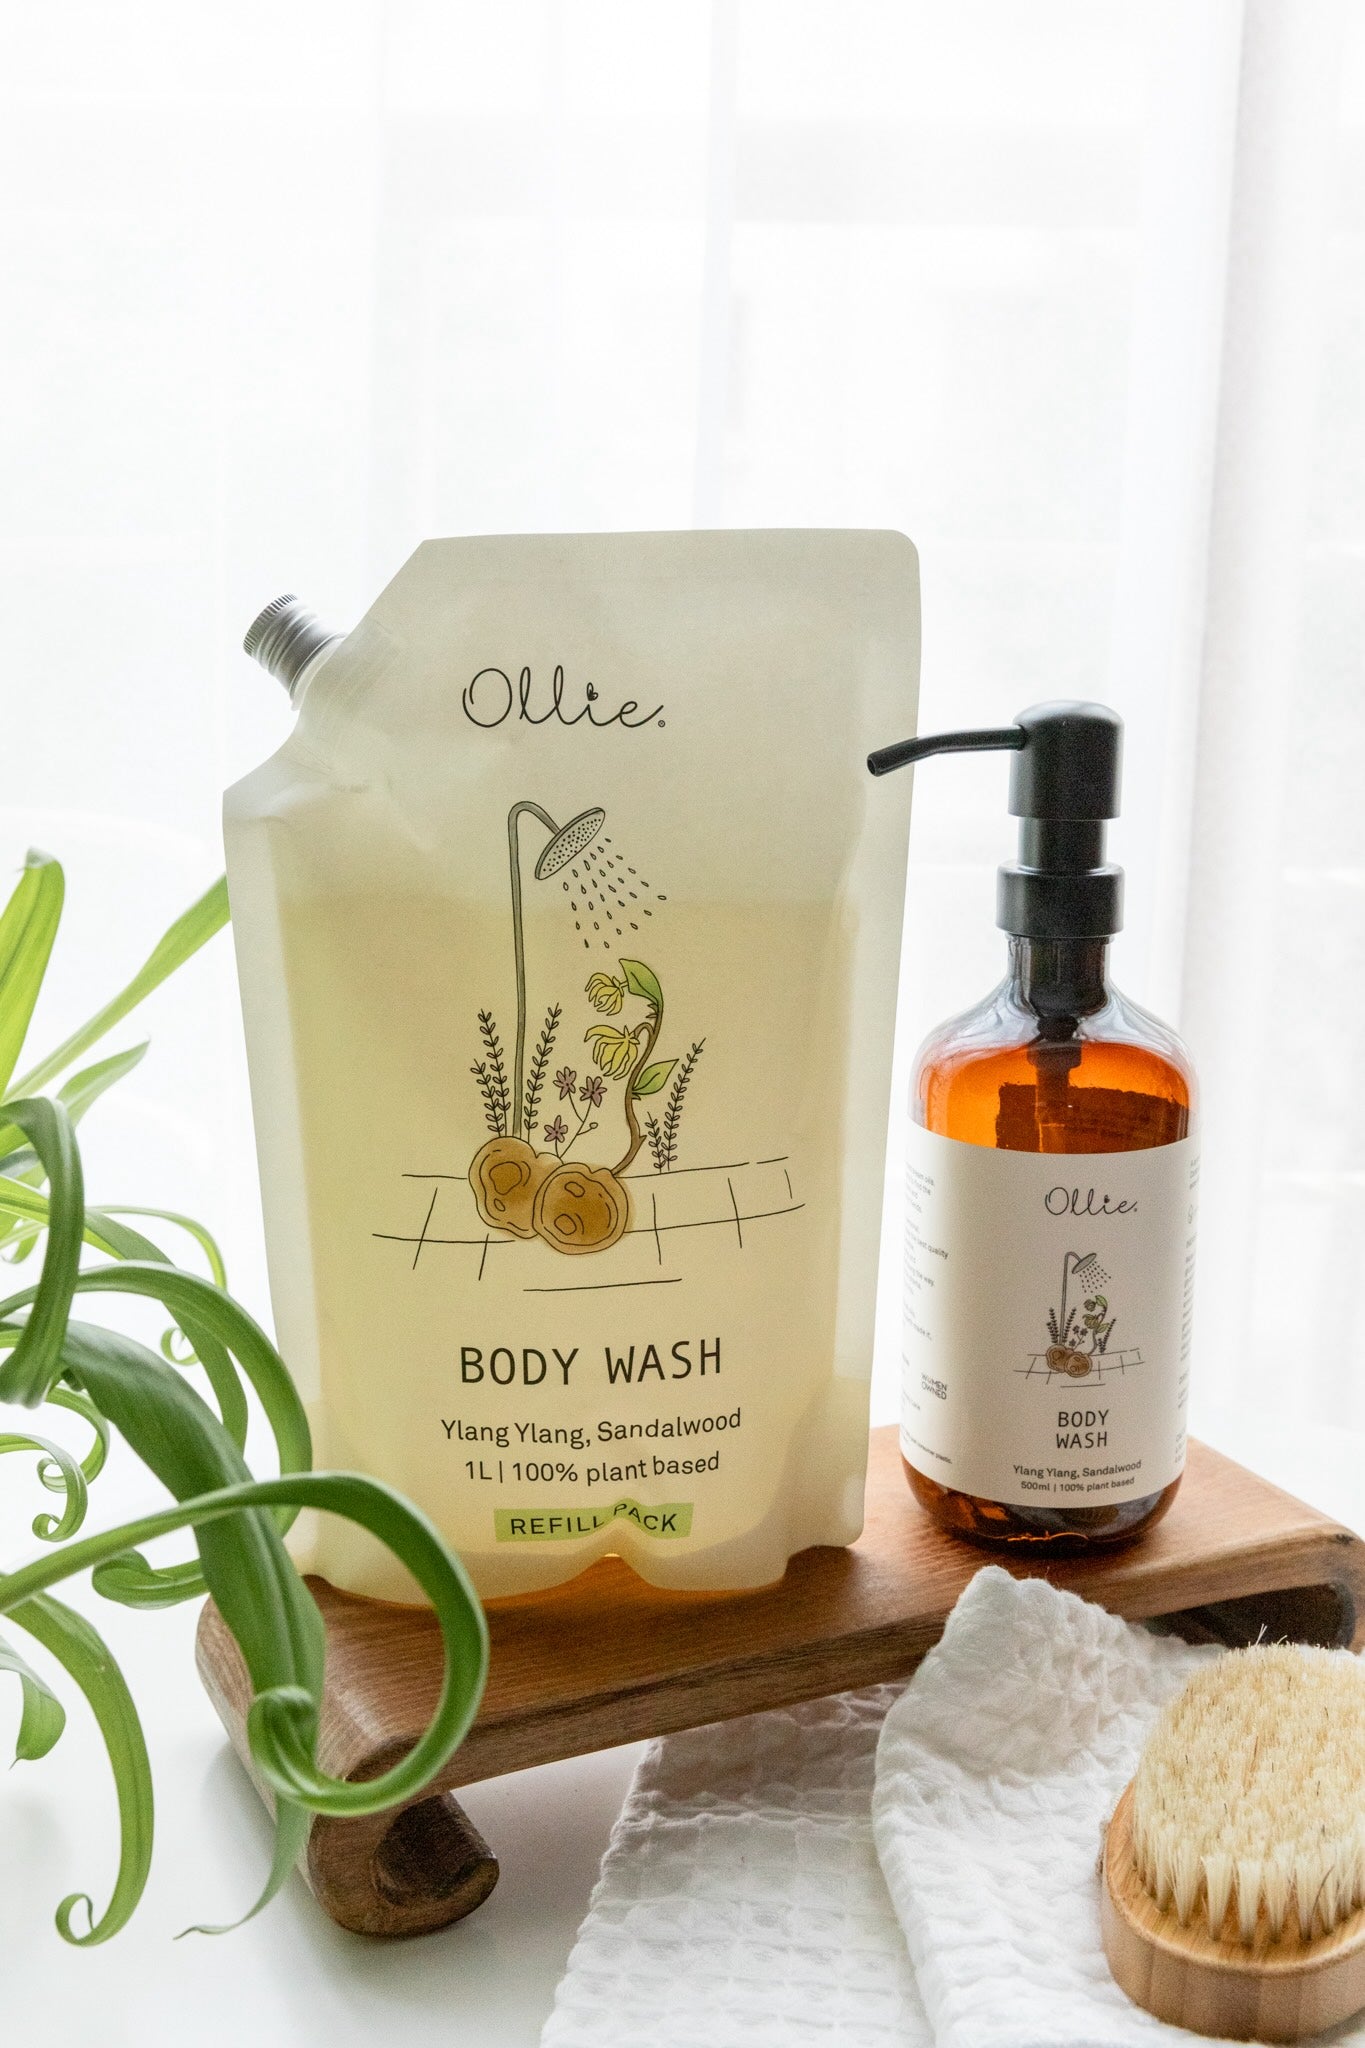 Ollie Body Wash (Sandalwood/Ylang Ylang) | Bodycare | The Green Collective SG